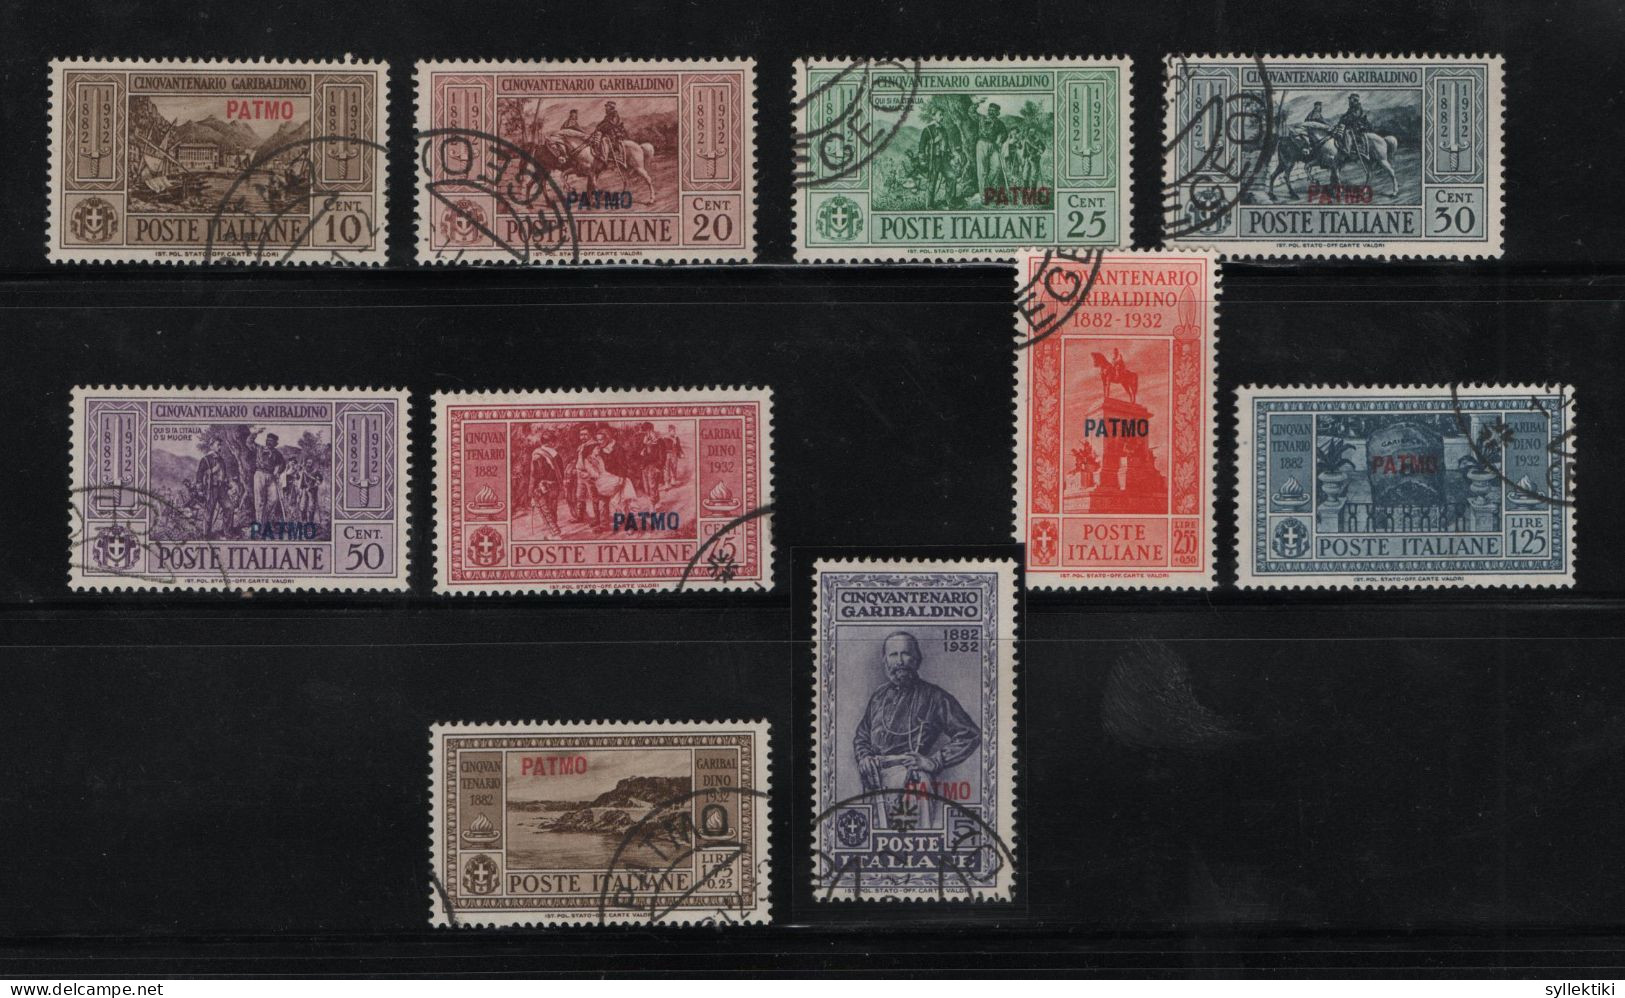 GREECE 1932 DODECANESE GARIBALDI ISSUE PATMO OVERPRINT COMPLETE SET USD STAMPS   HELLAS No 108XI - 117XI AND VALUE EURO - Dodecaneso